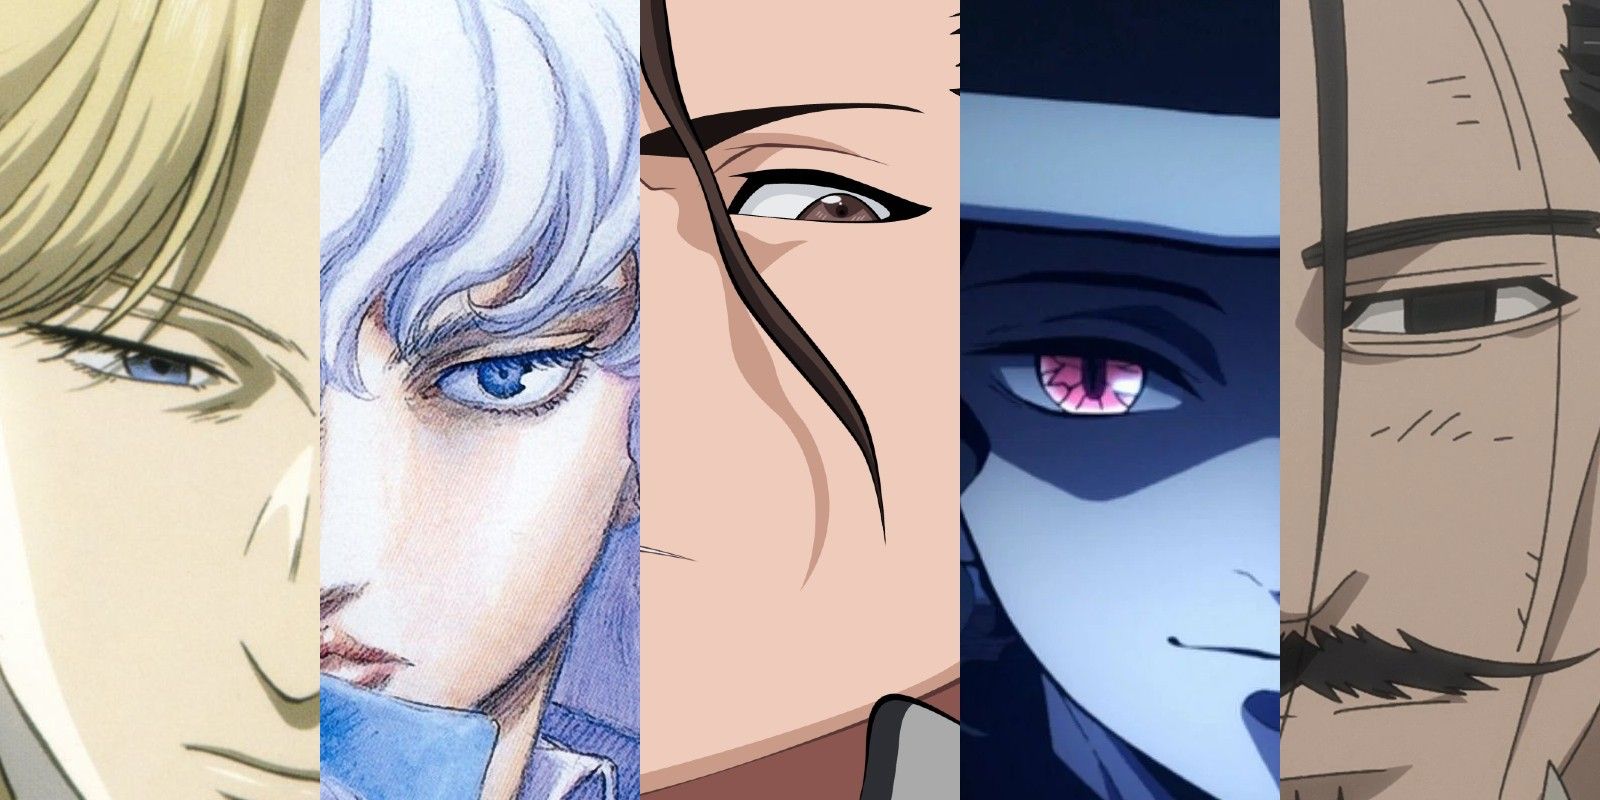 Who is the anime character with the highest charisma? - Quora